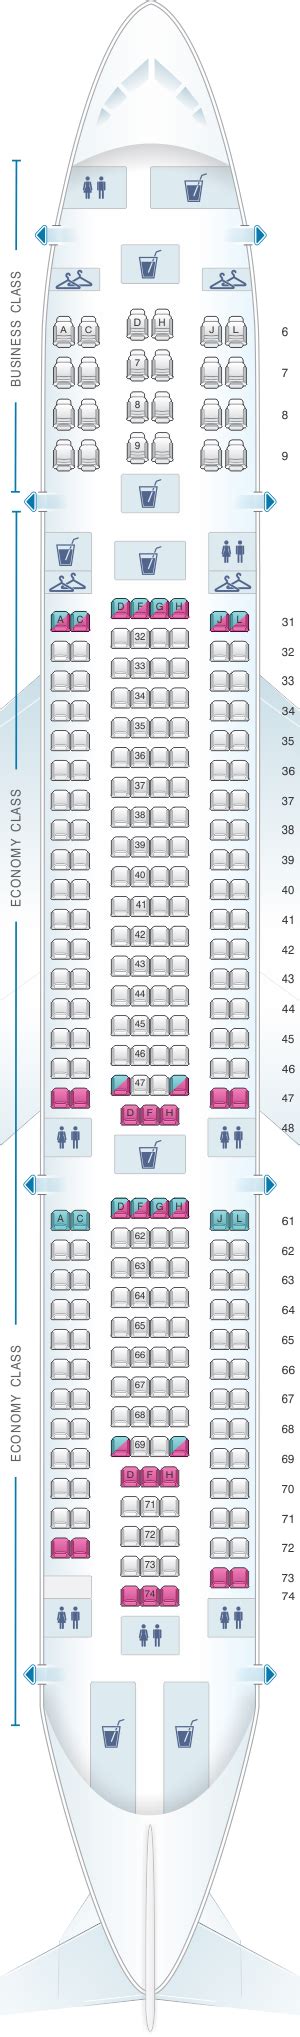 China Eastern Airbus A330 200 Seating Plan Tutorial Pics